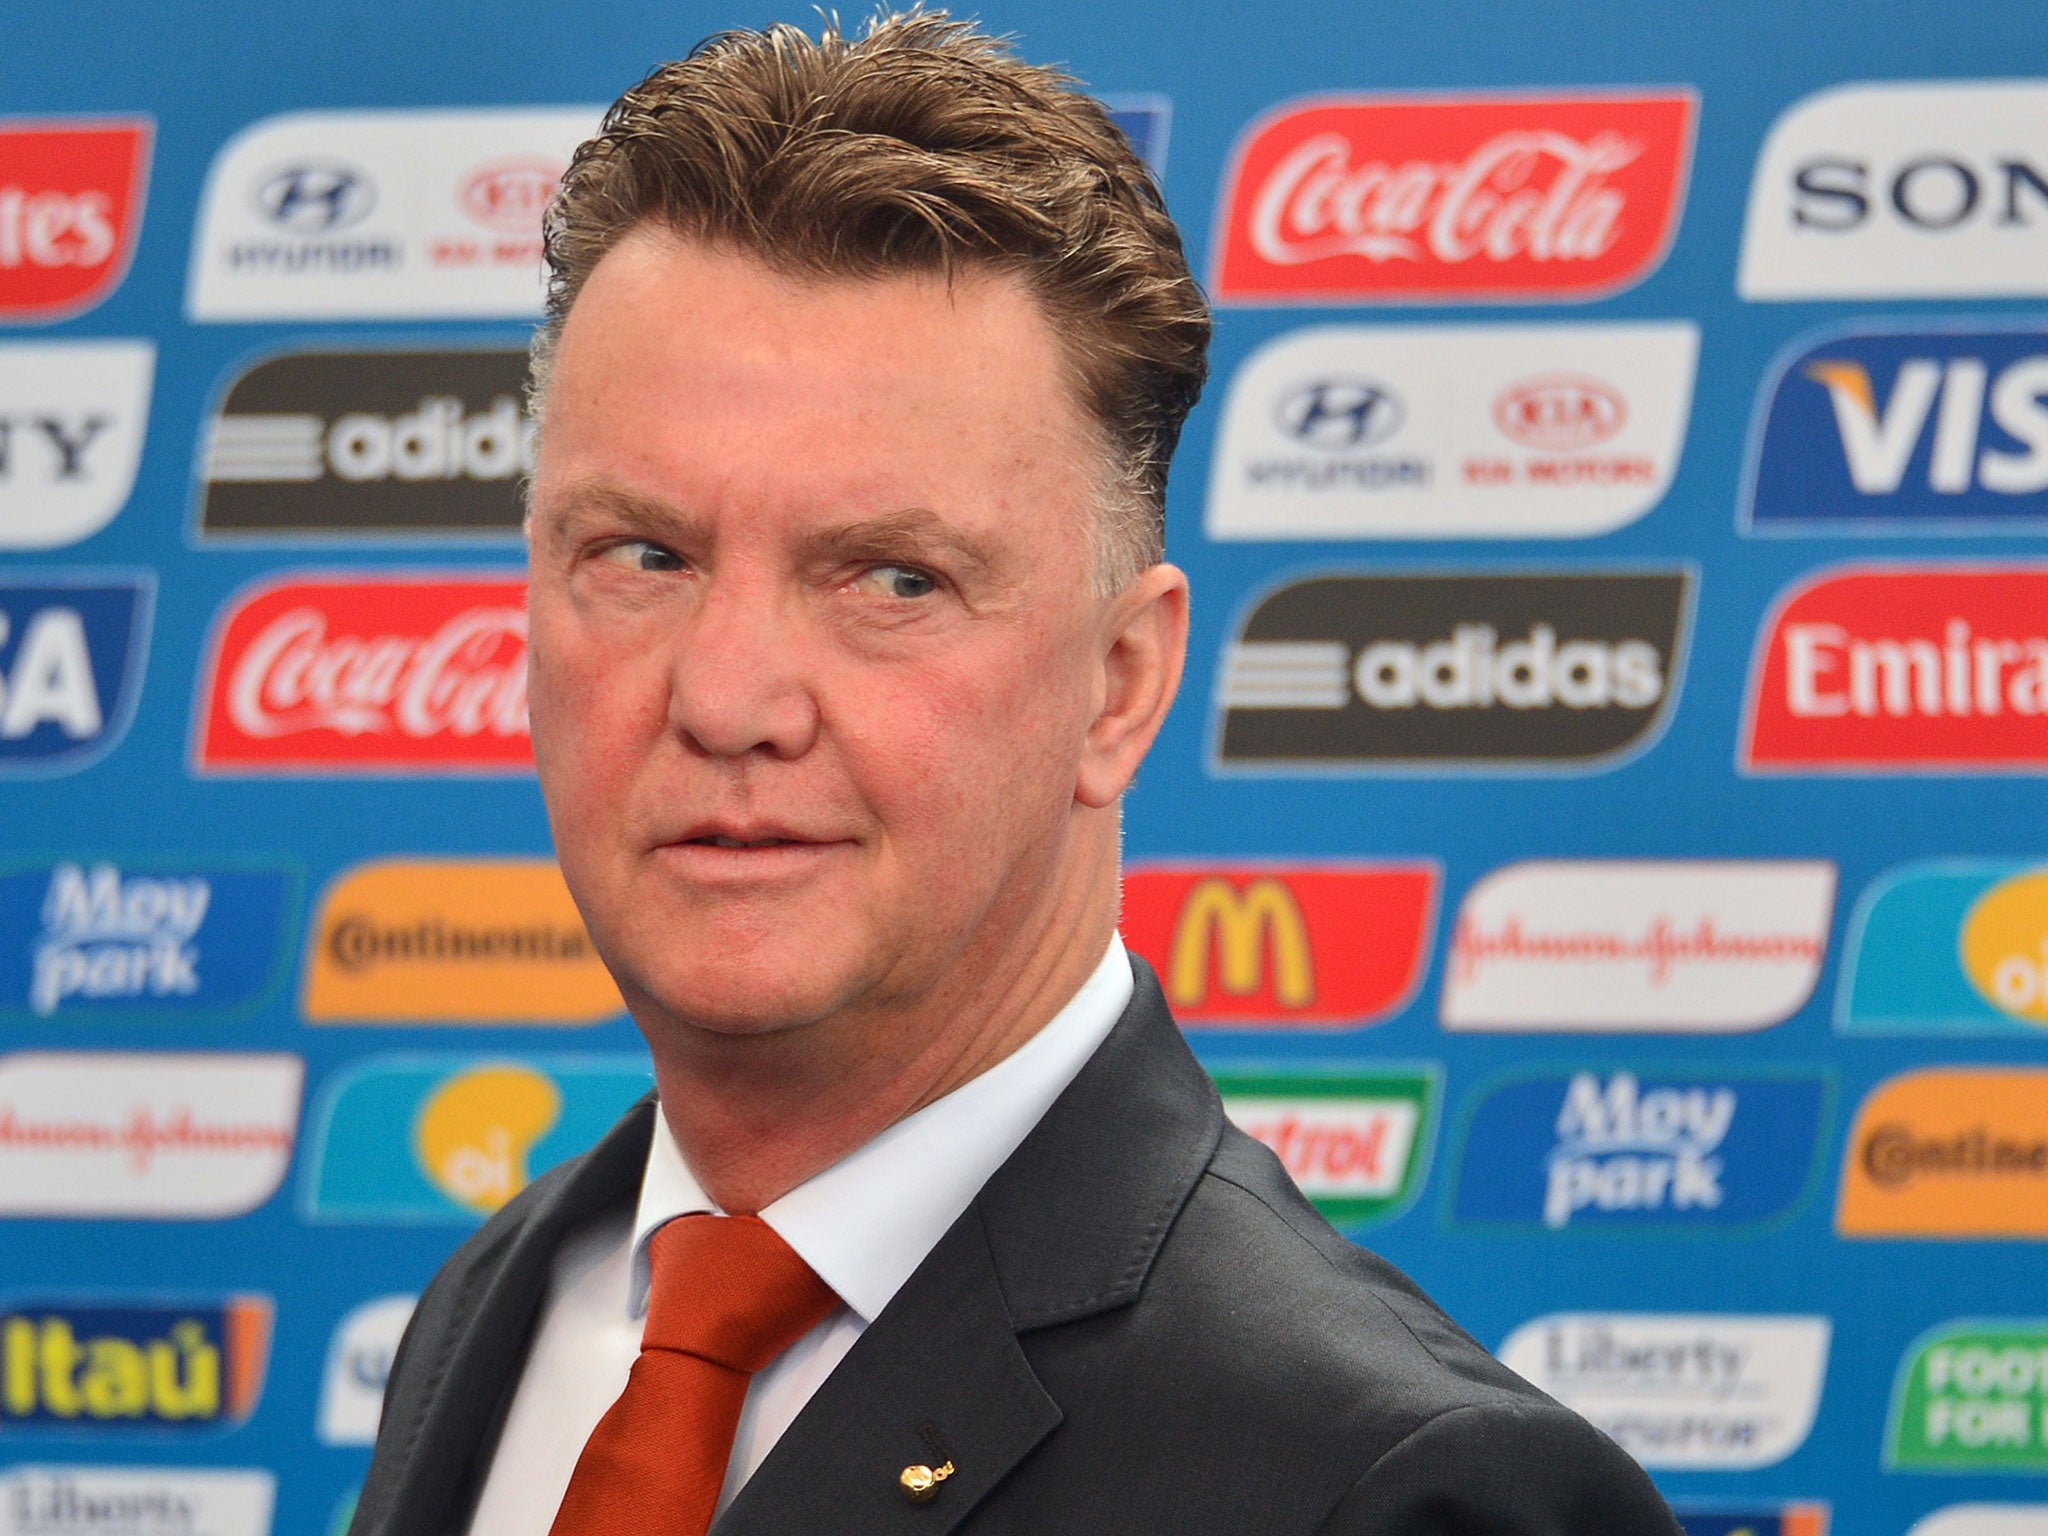 Louis van Gaal admits he could be tempted to take on a 'new challenge' when he leaves his role as coach of the Netherlands national team